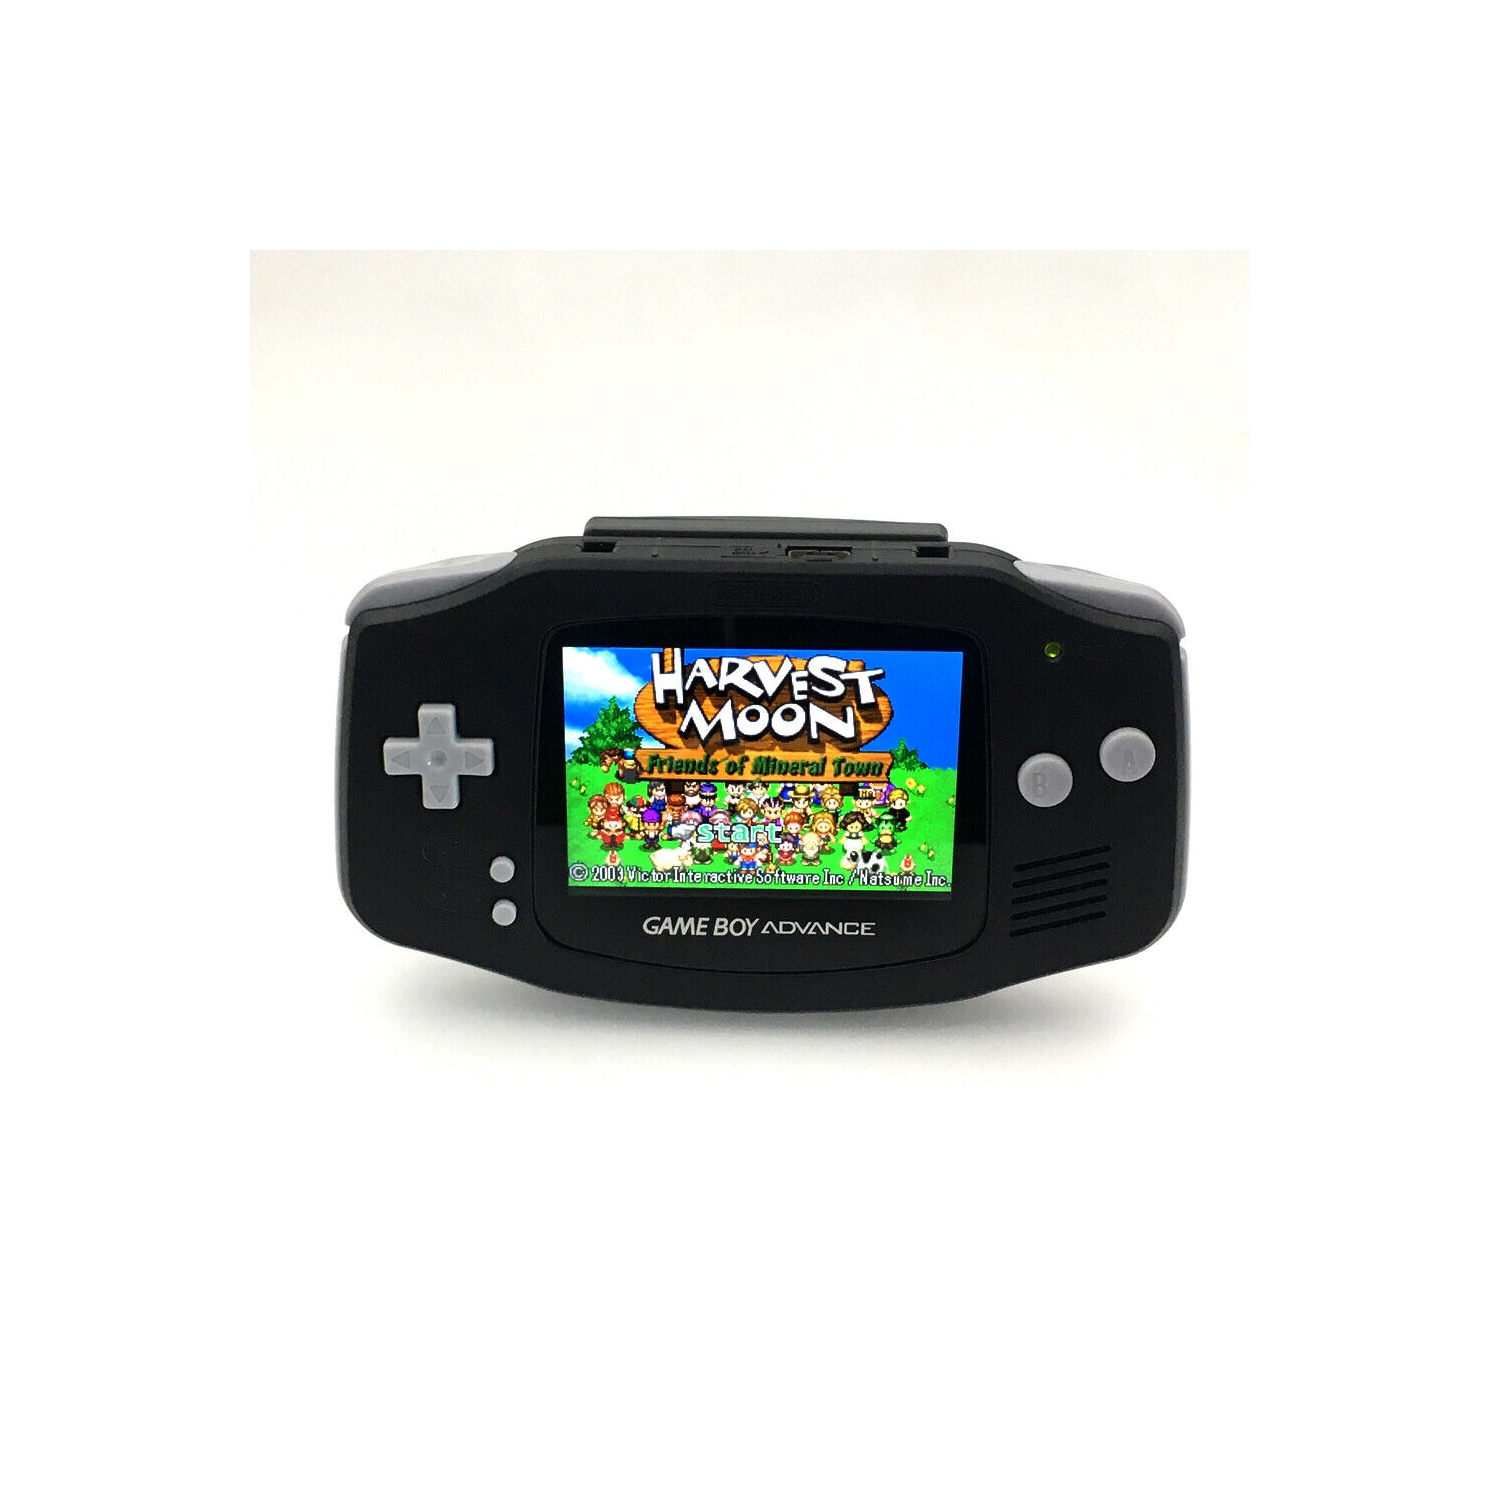 Authentic Refurbished Excellent Nintendo Gameboy Advance GBA Black Handheld Gaming BACKLIT IPS And Rechargeable Battery